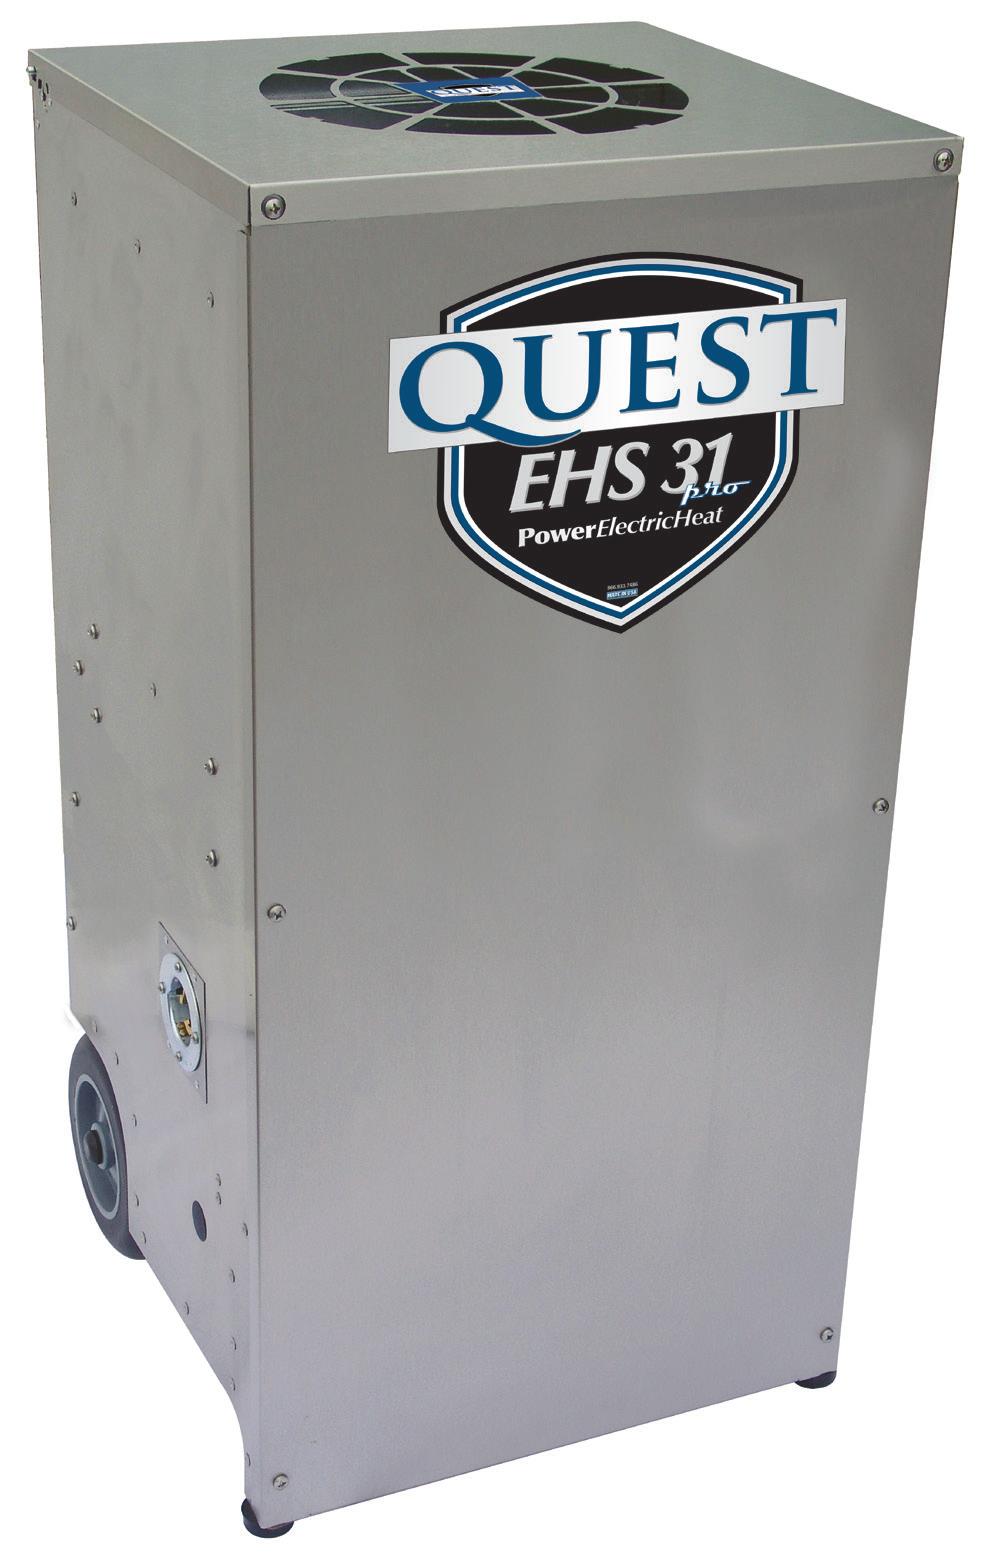 At the 50-amp setting, the Power Electric Heat EHS 31 Pro produces 31,000 BTU s thats 360 CFM with a 80 F temperature rise.